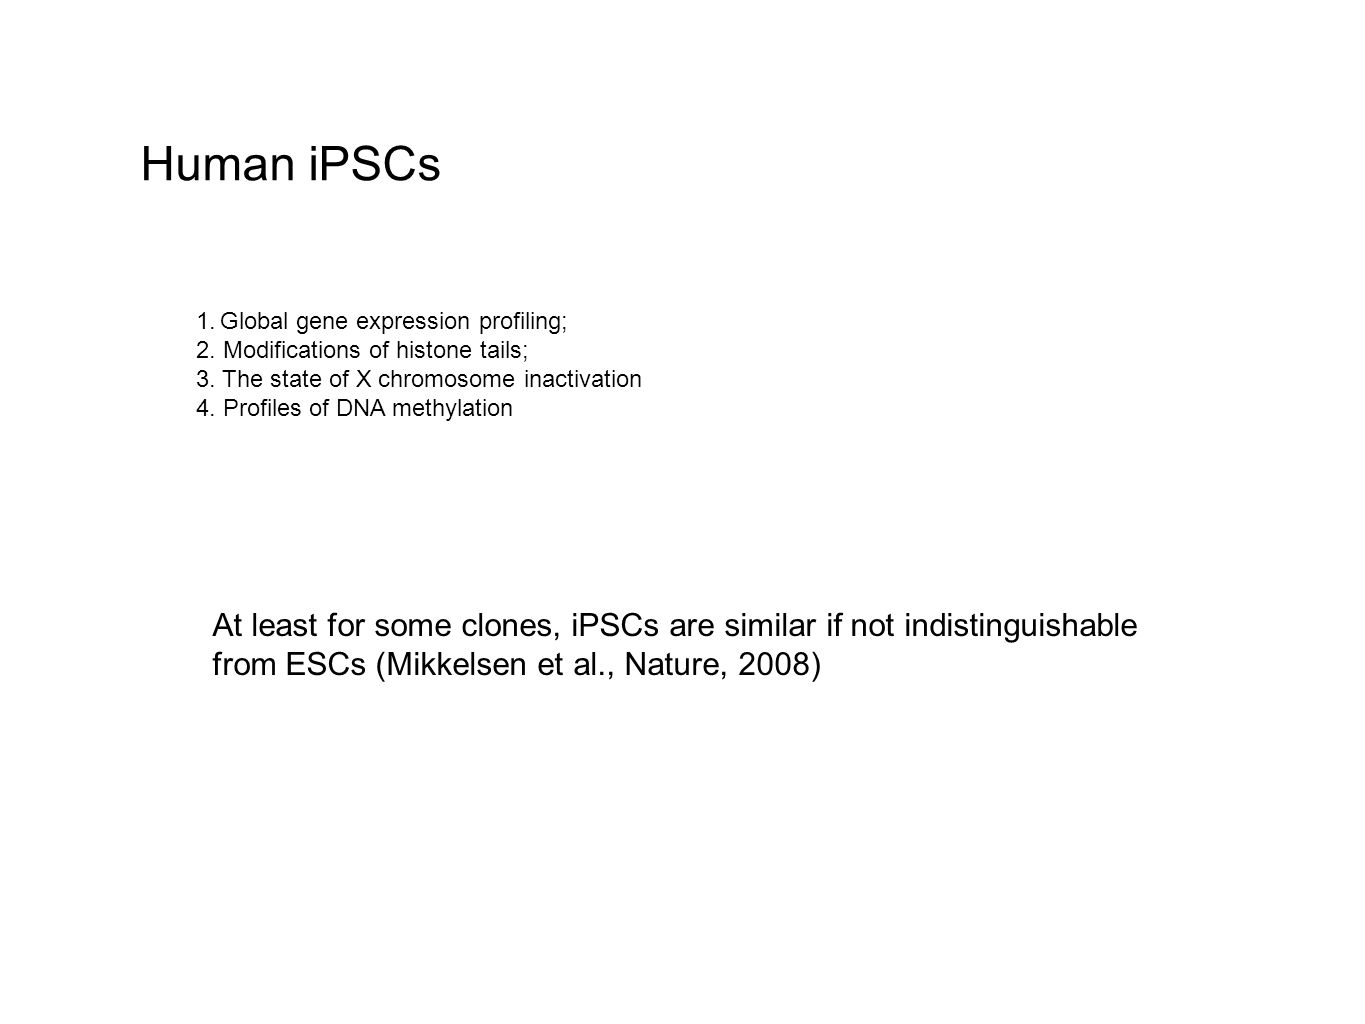 Human iPSCs At least for some clones, iPSCs are similar if not indistinguishable from ESCs (Mikkelsen et al., Nature, 2008) 1.Global gene expression profiling; 2.